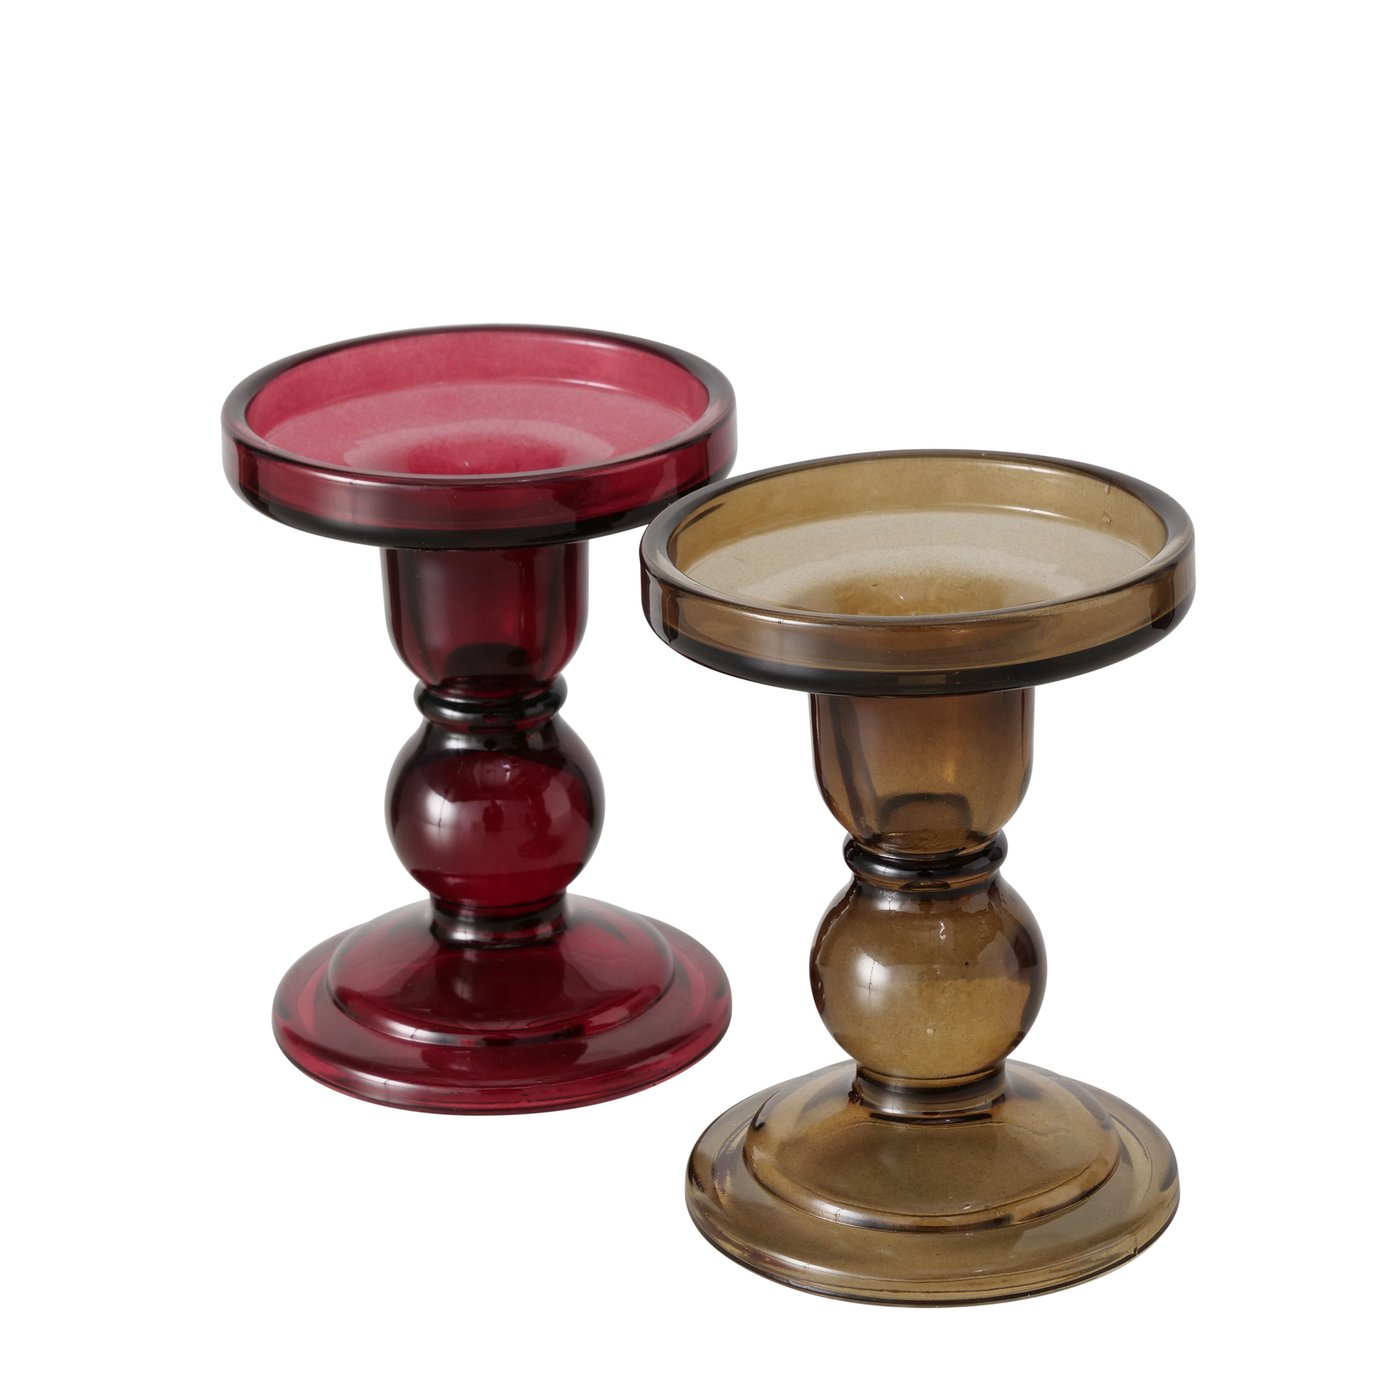 &Quirky Glass Pillar Candlestick Holder : Red or Green